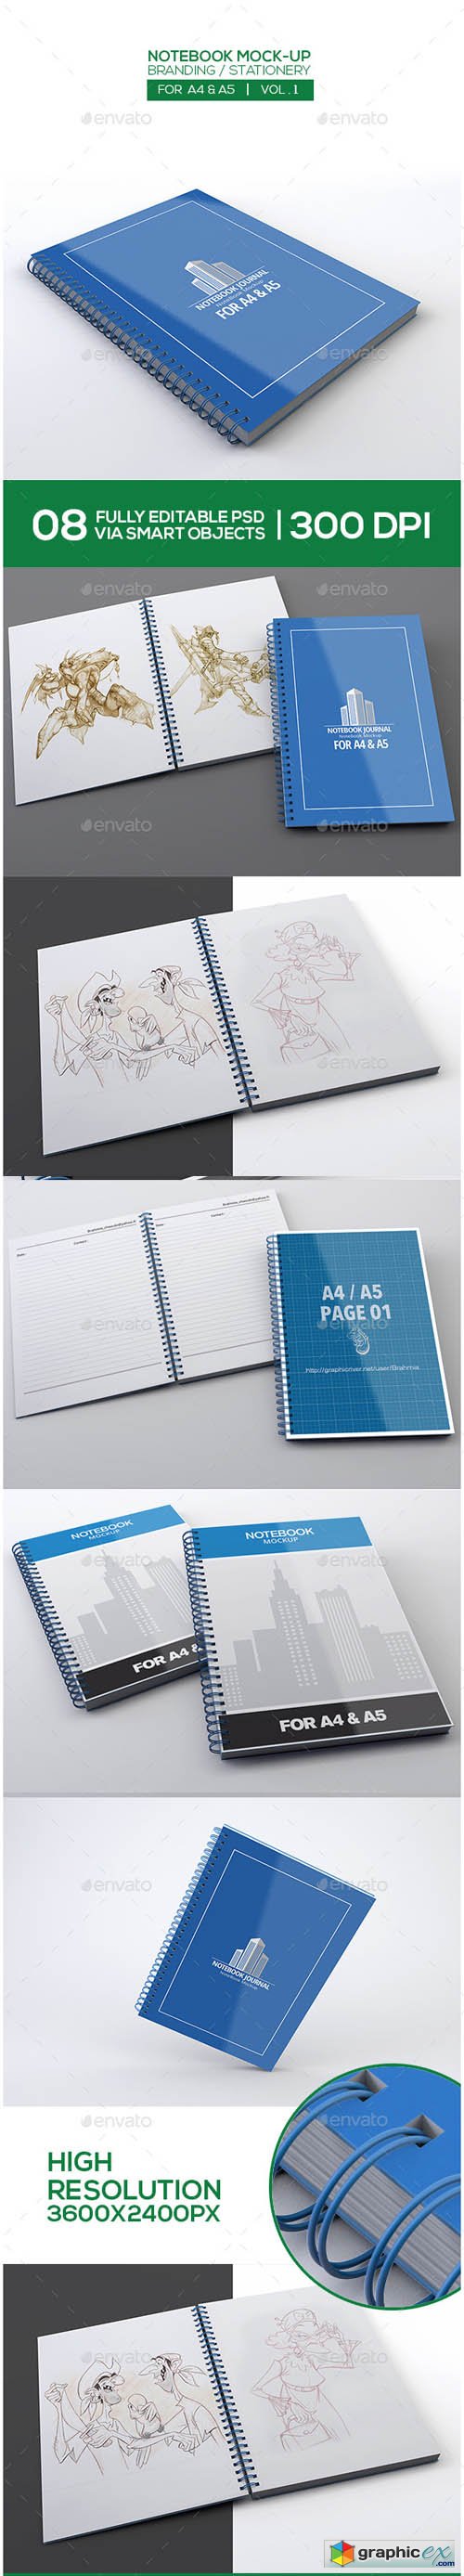 Download Notebook Mock Up For A4 A5 Free Download Vector Stock Image Photoshop Icon PSD Mockup Templates